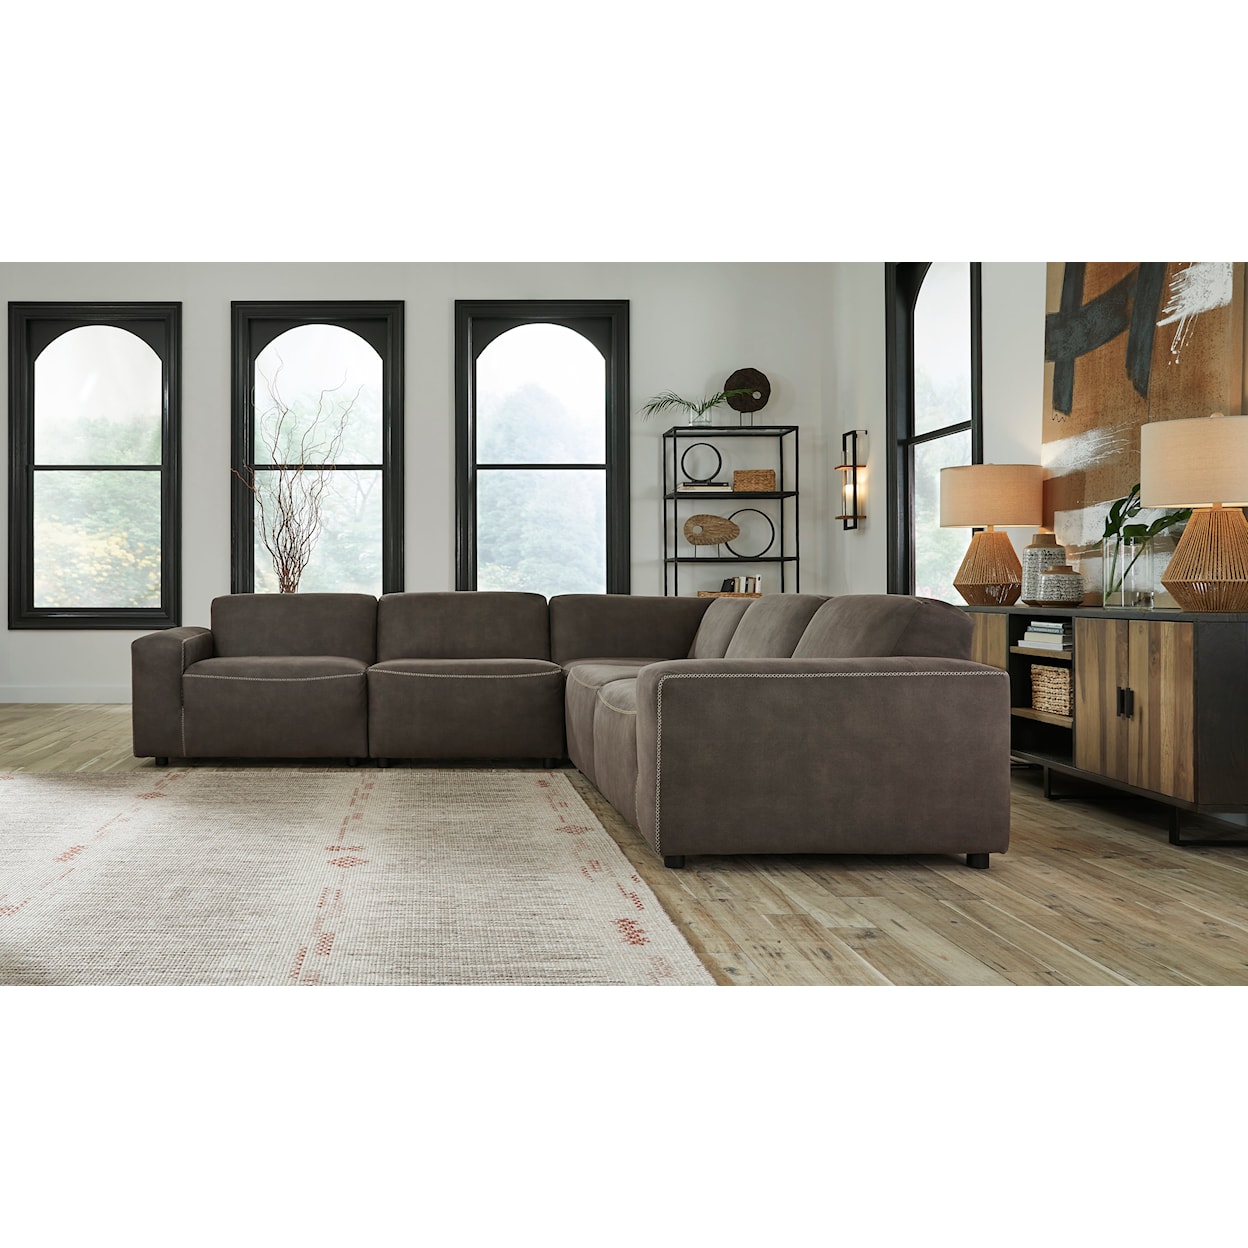 Signature Design by Ashley Furniture Allena 5-Piece Sectional